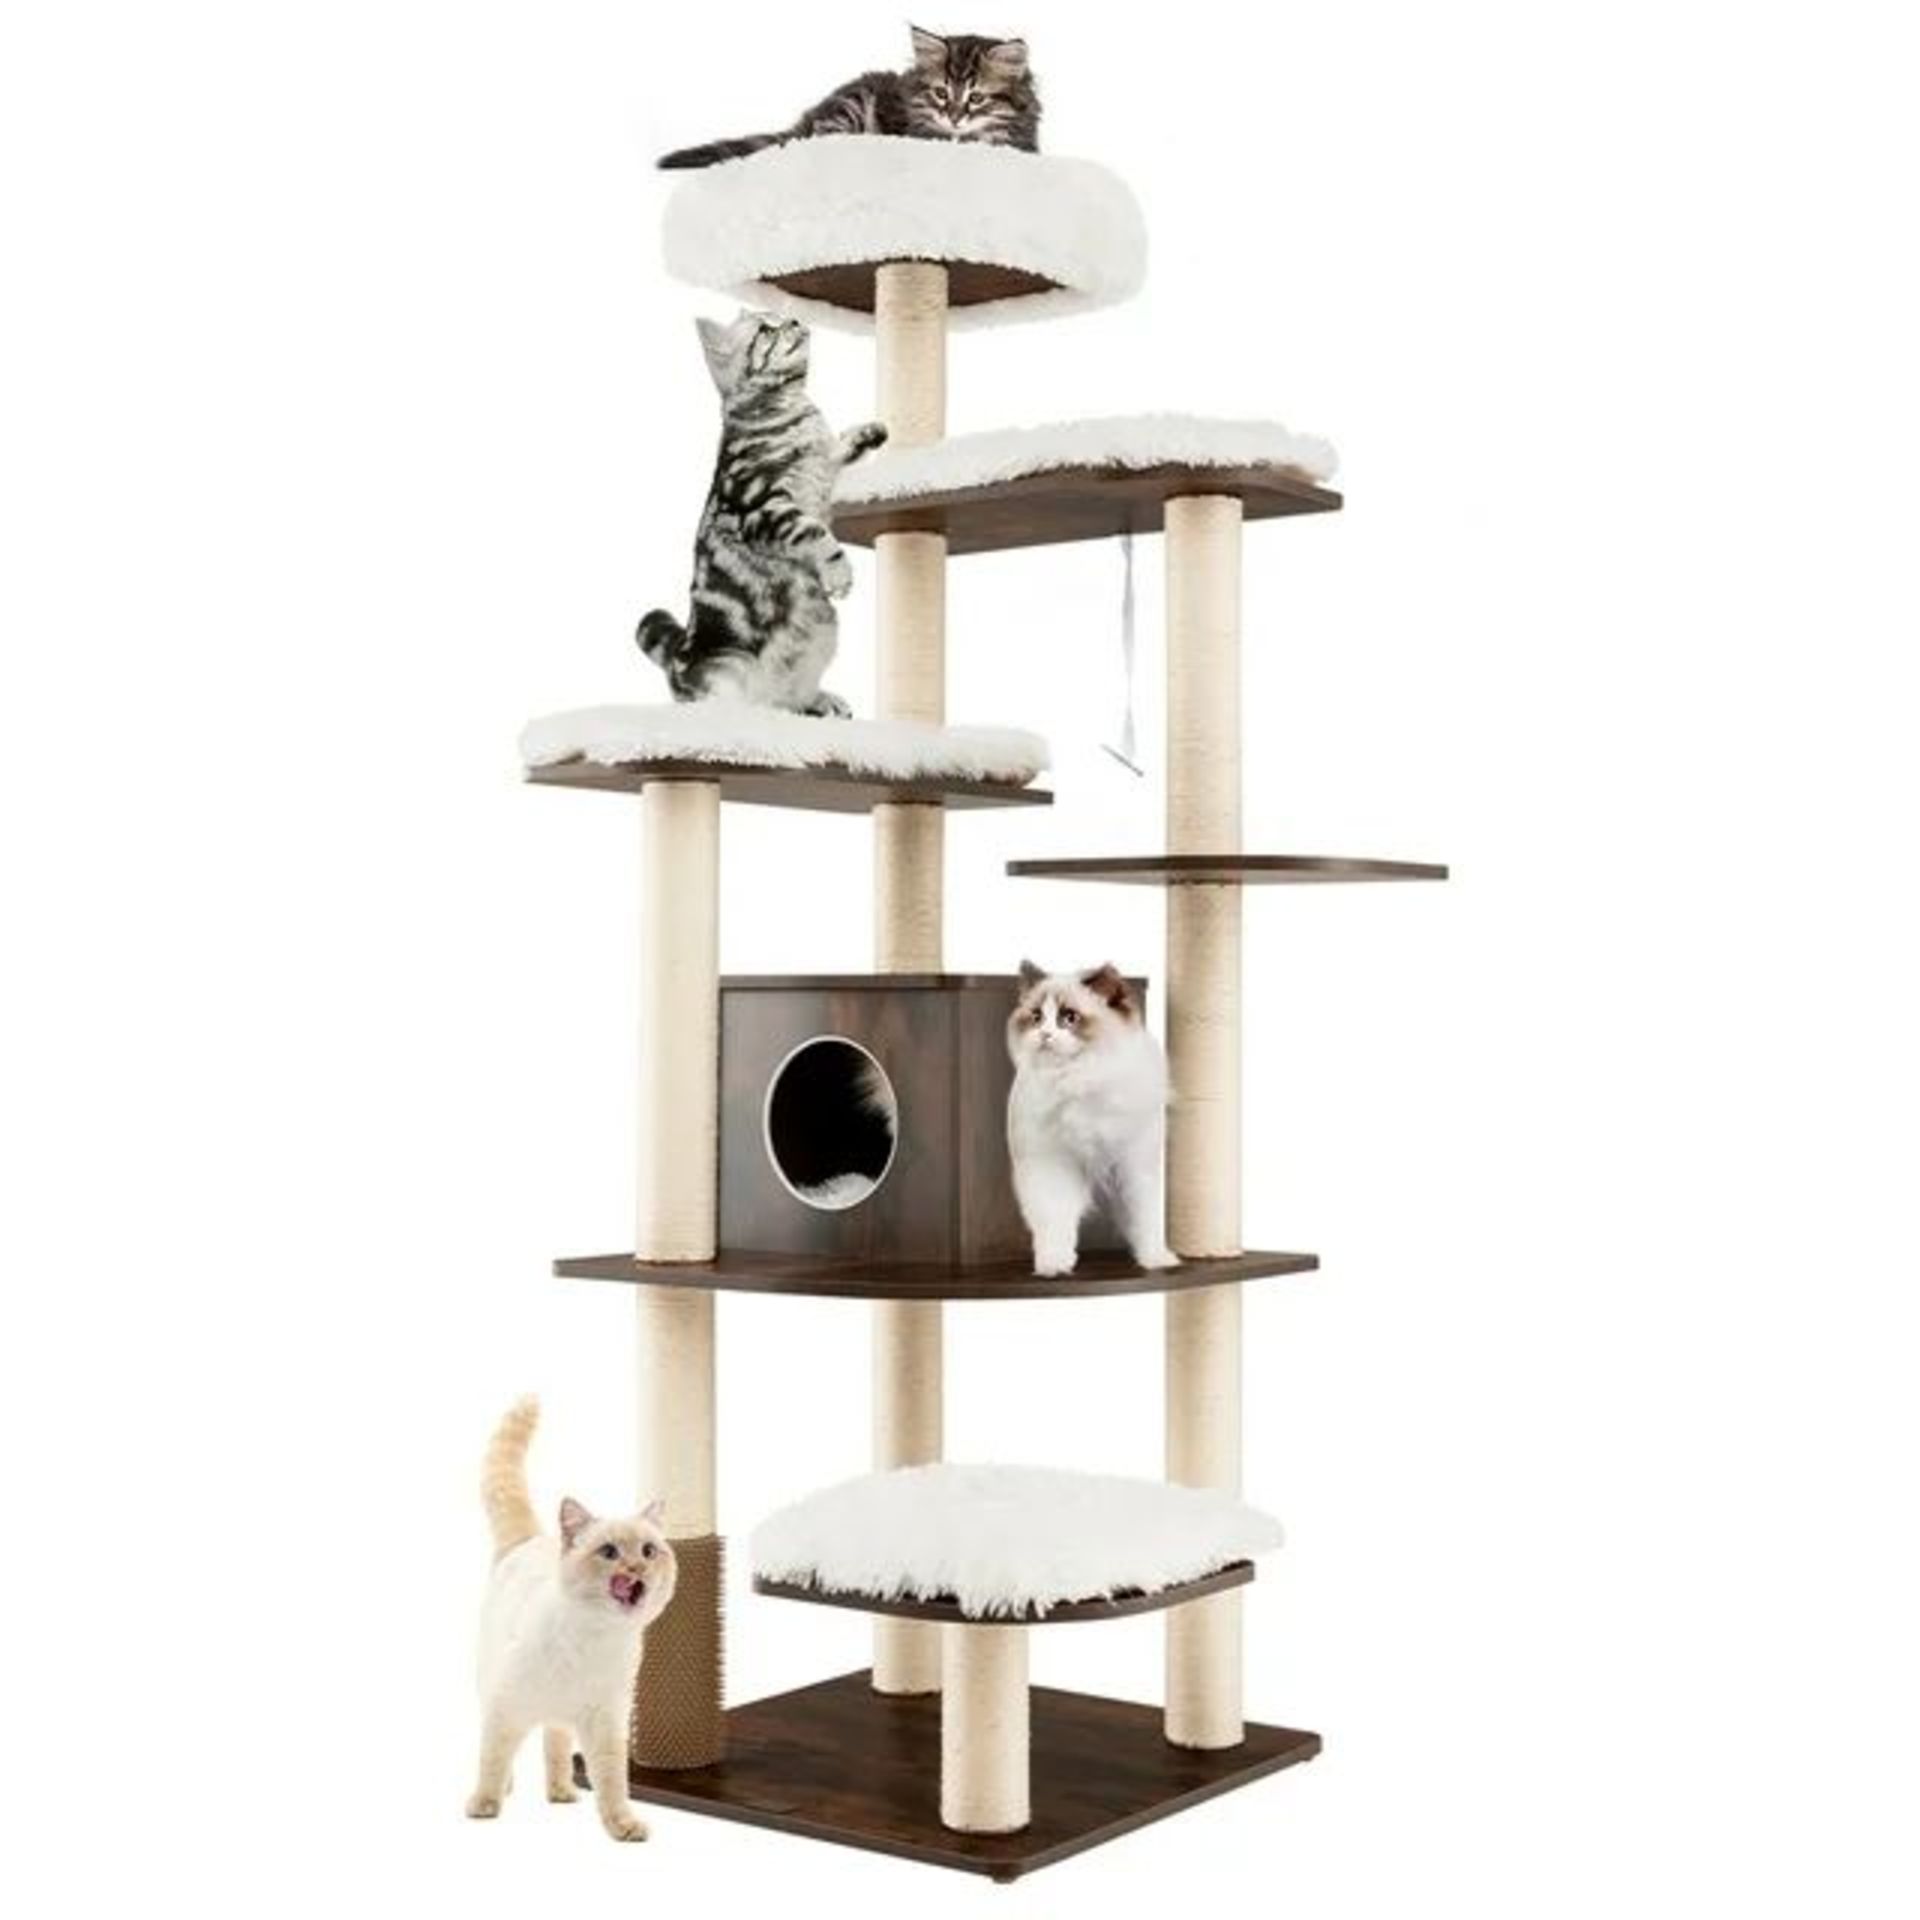 Wooden Cat Tree 71'' 7-Layer Cat Tower with Sisal Scratching Posts Perch & Cushions Brown. - ER26.